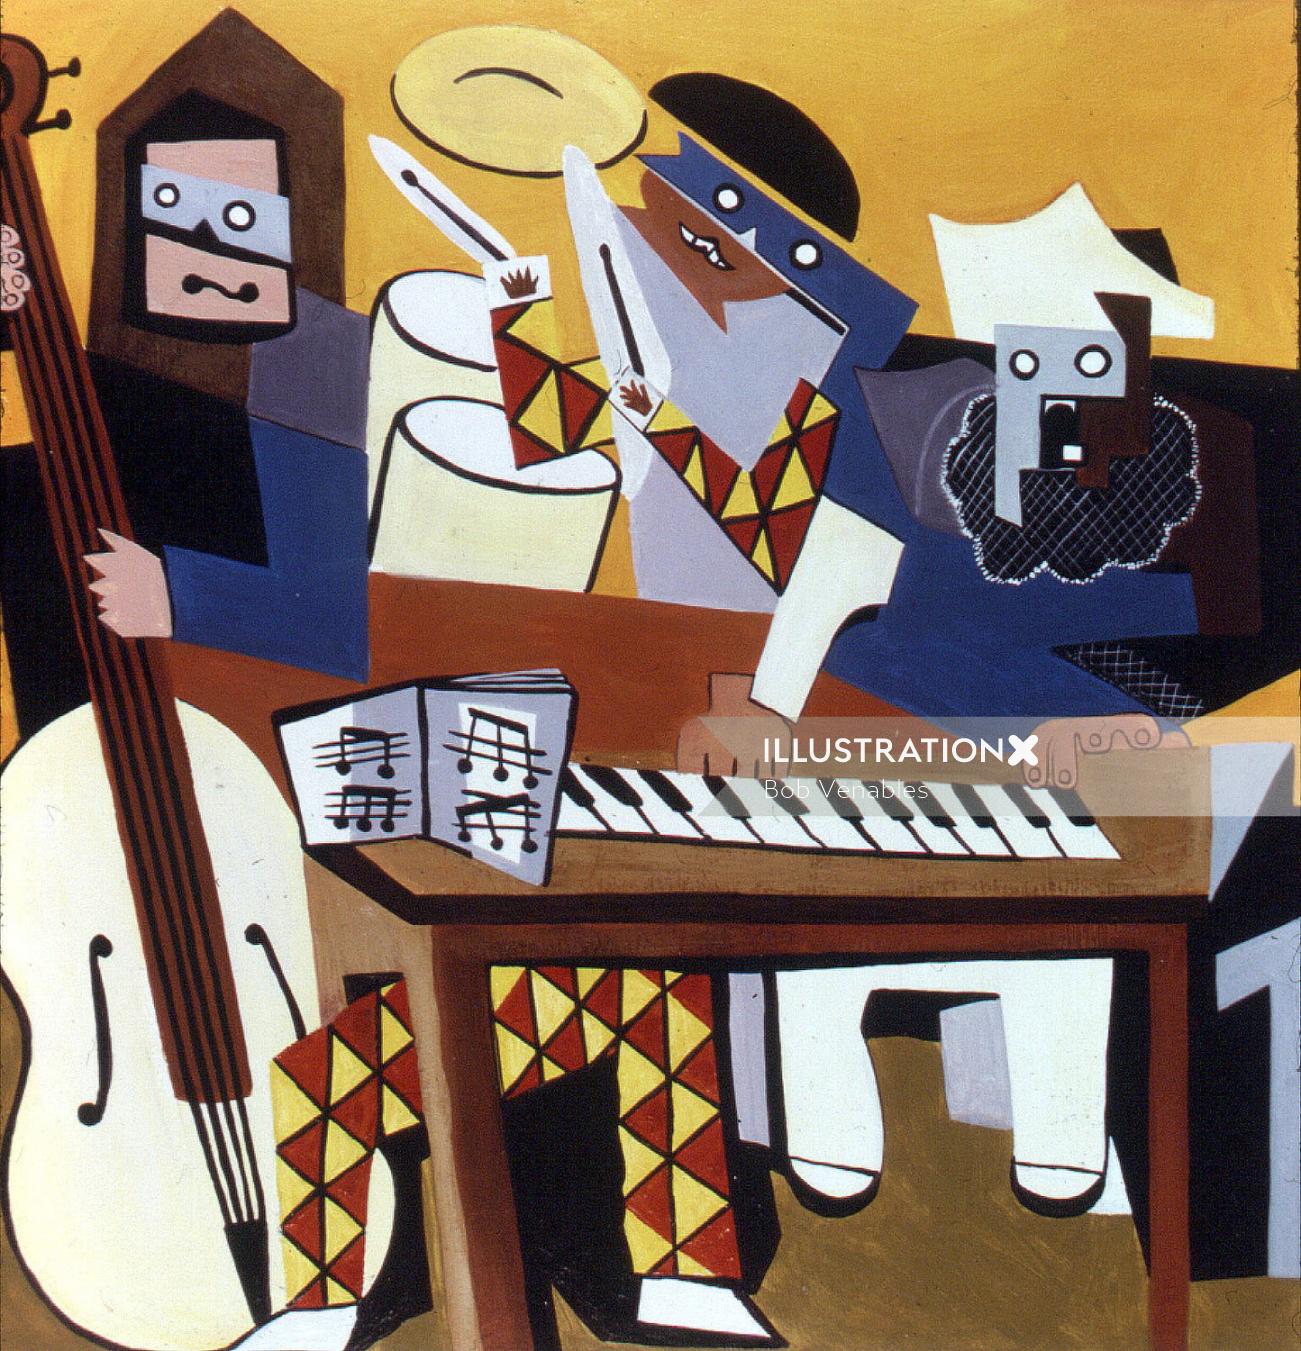 Abstract illustration of People learning music & painting